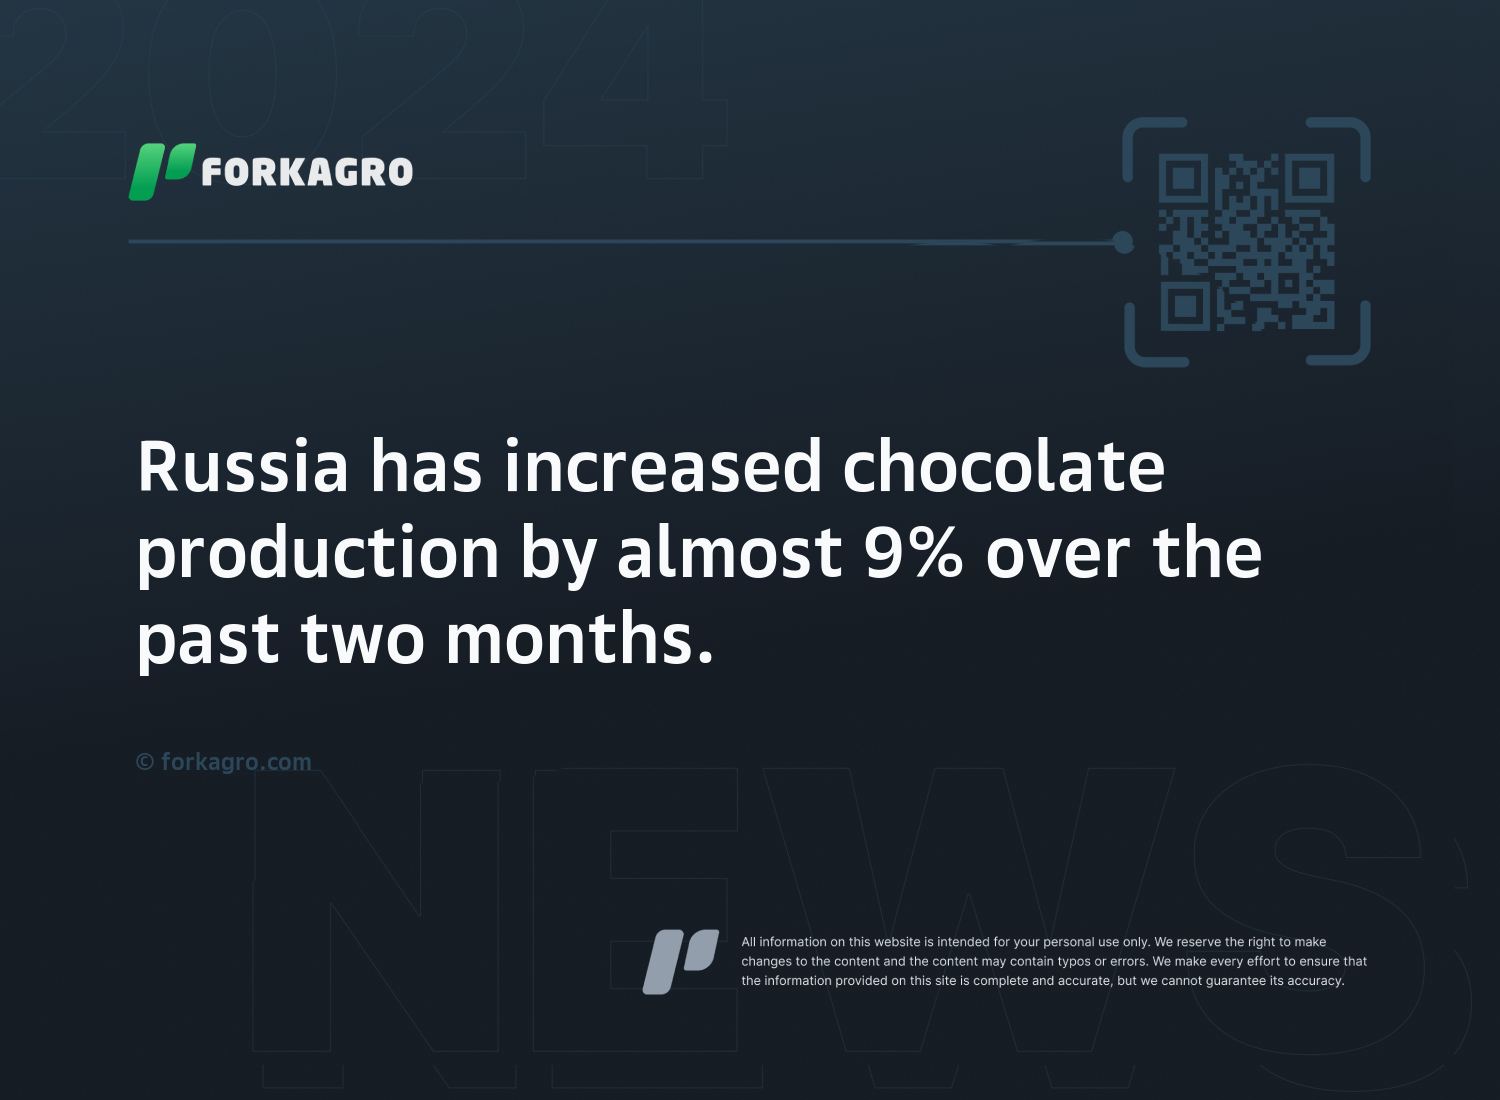 Russia has increased chocolate production by almost 9% over the past two months.